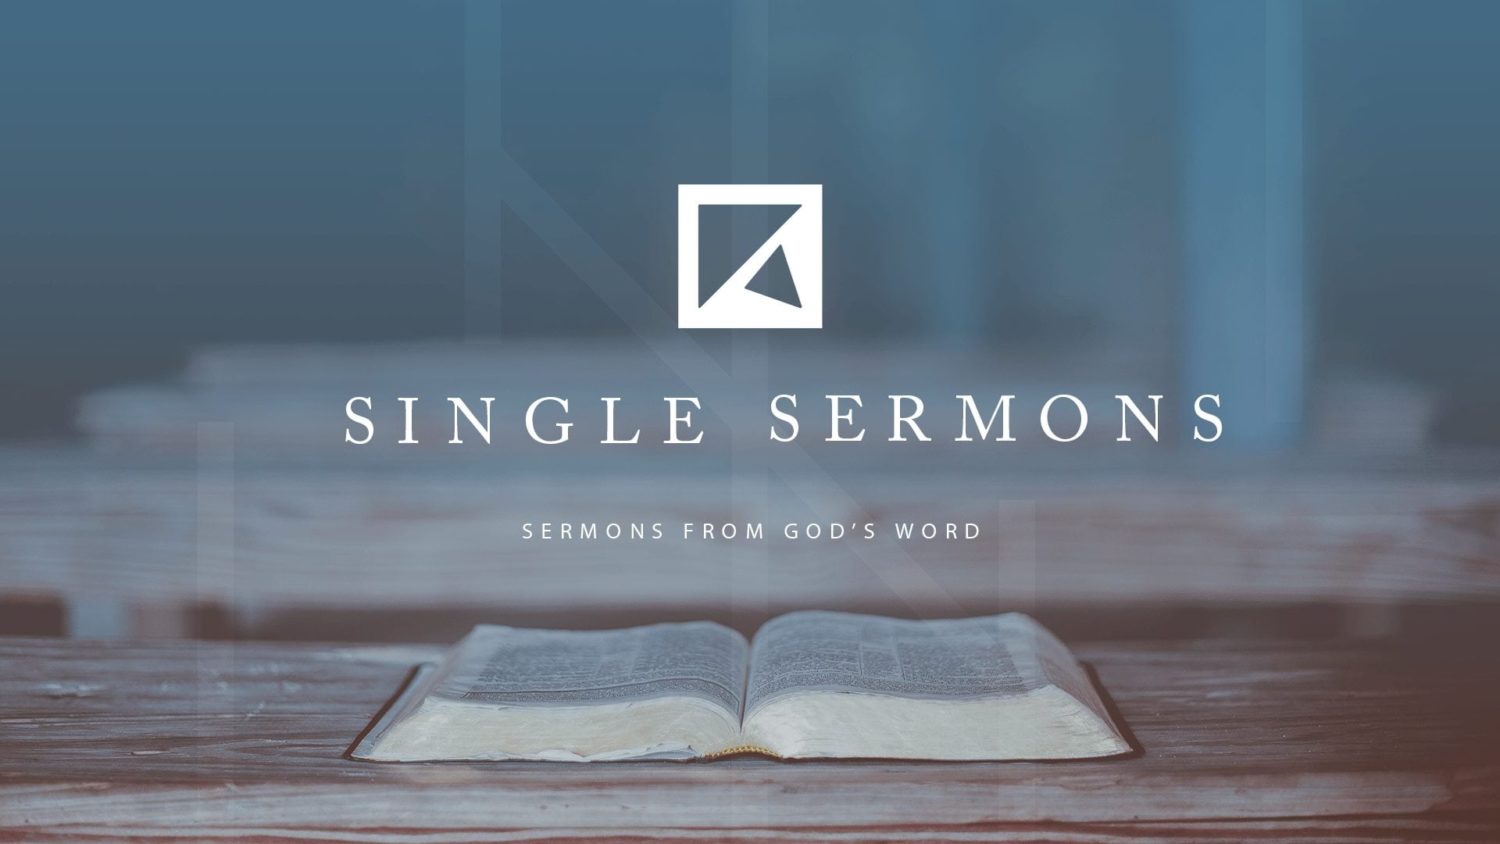 Featured image for “Single Sermon”